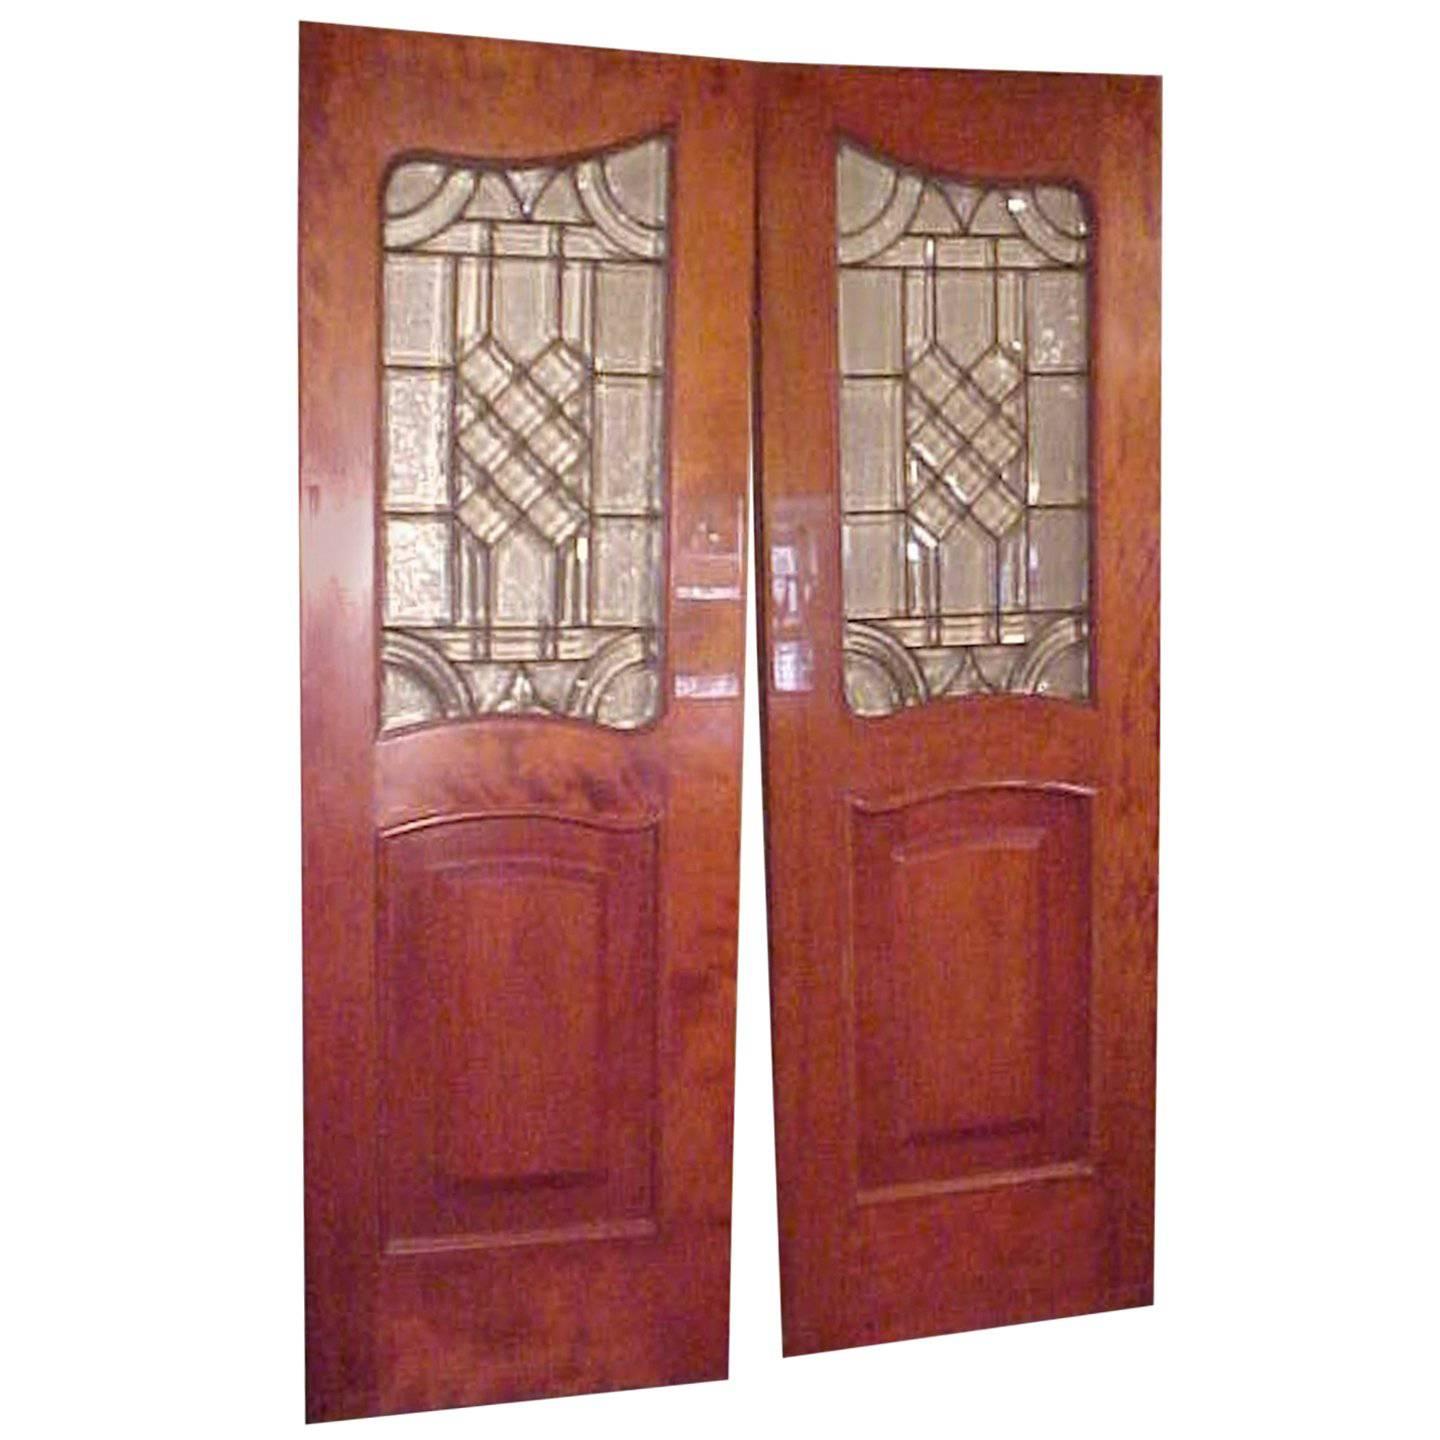 Antique Leaded Glass Doors Inset in Mahogany Raised Panel Doors-Provenance For Sale